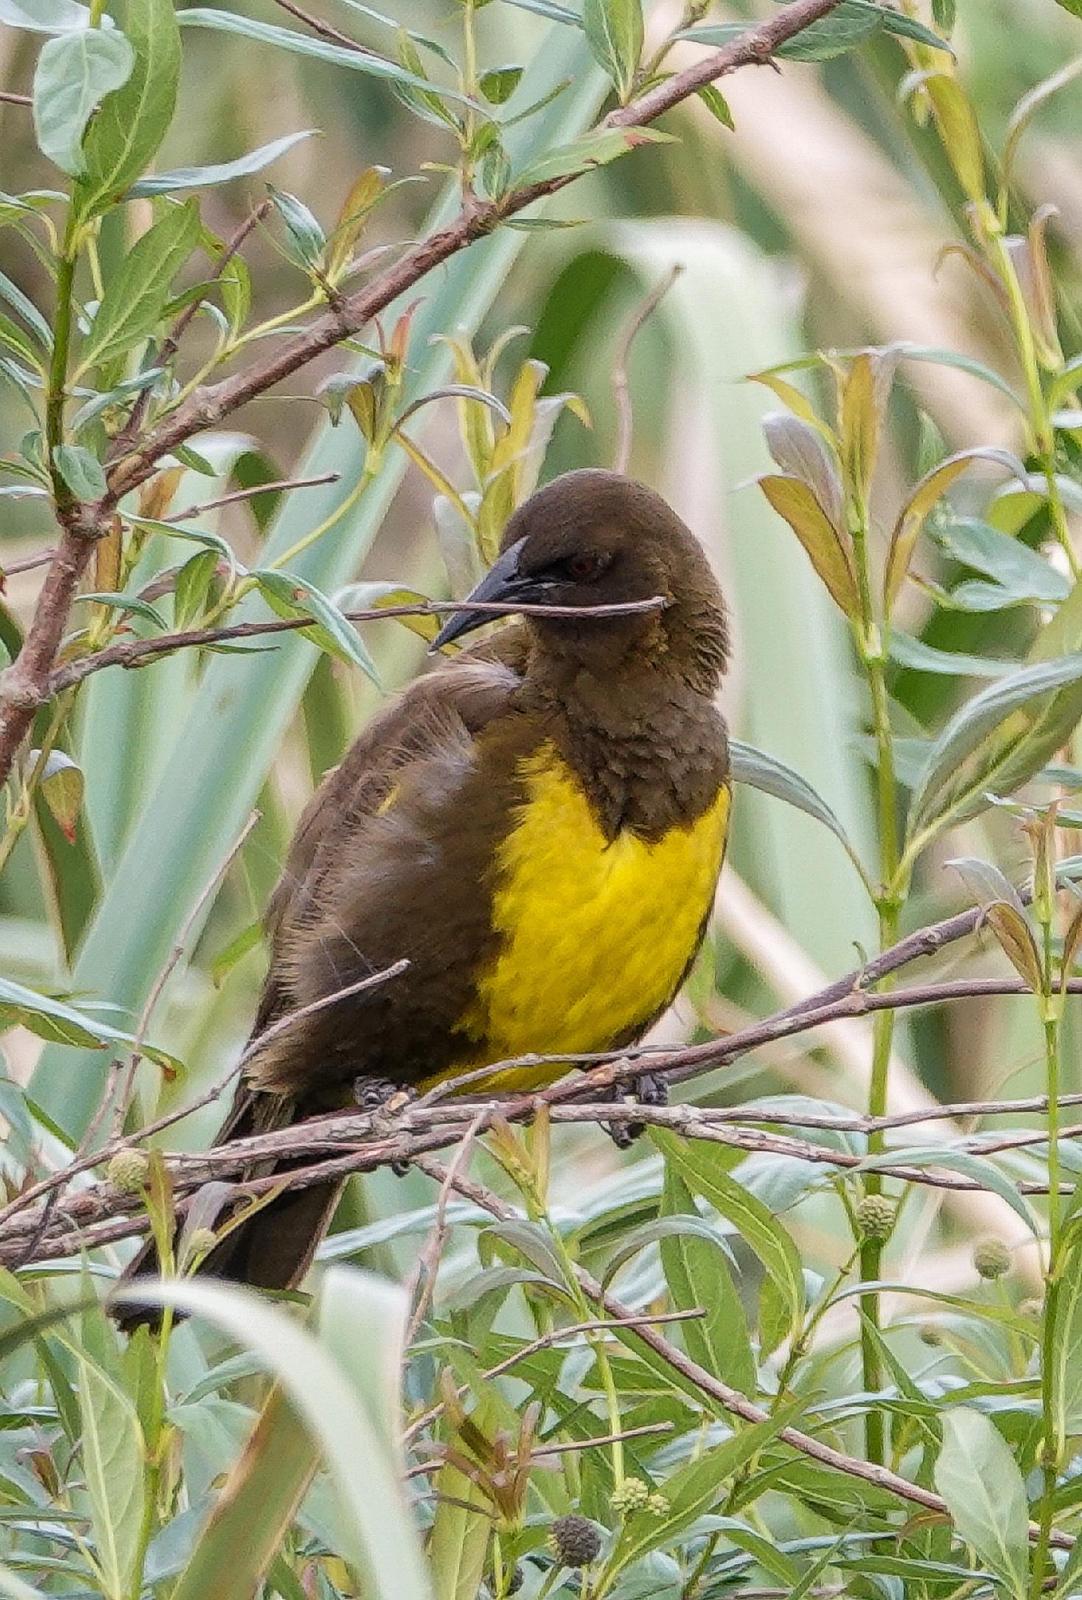 Brown-and-yellow Marshbird Photo by Kathleen Horn